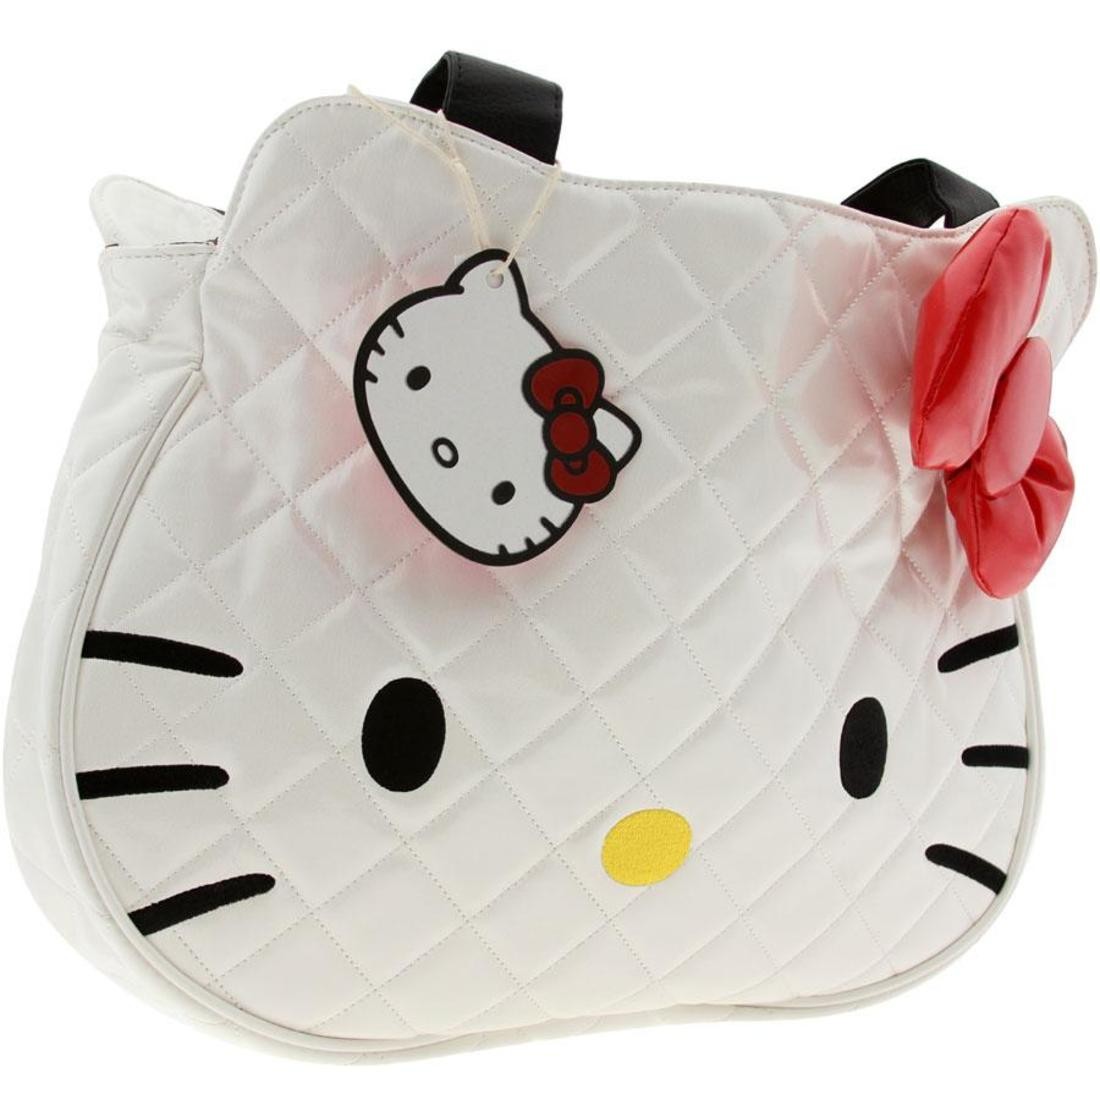 Hello Kitty Quilted Leather Handbags